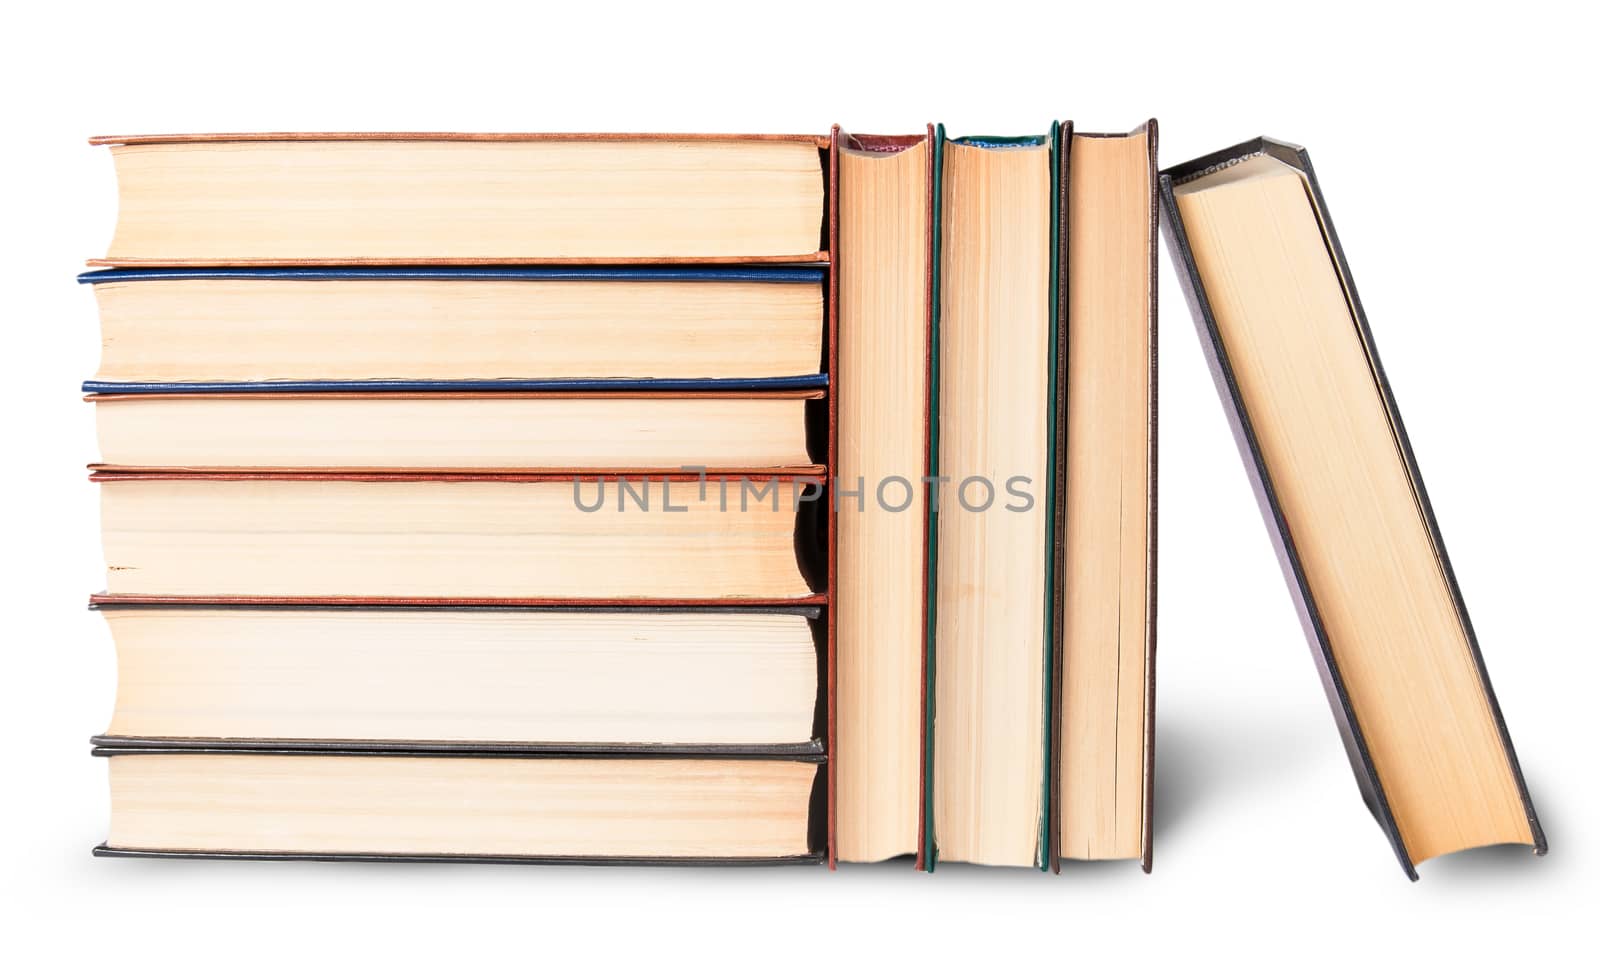 Vertical and horizontal stacks of old books isolated on white background